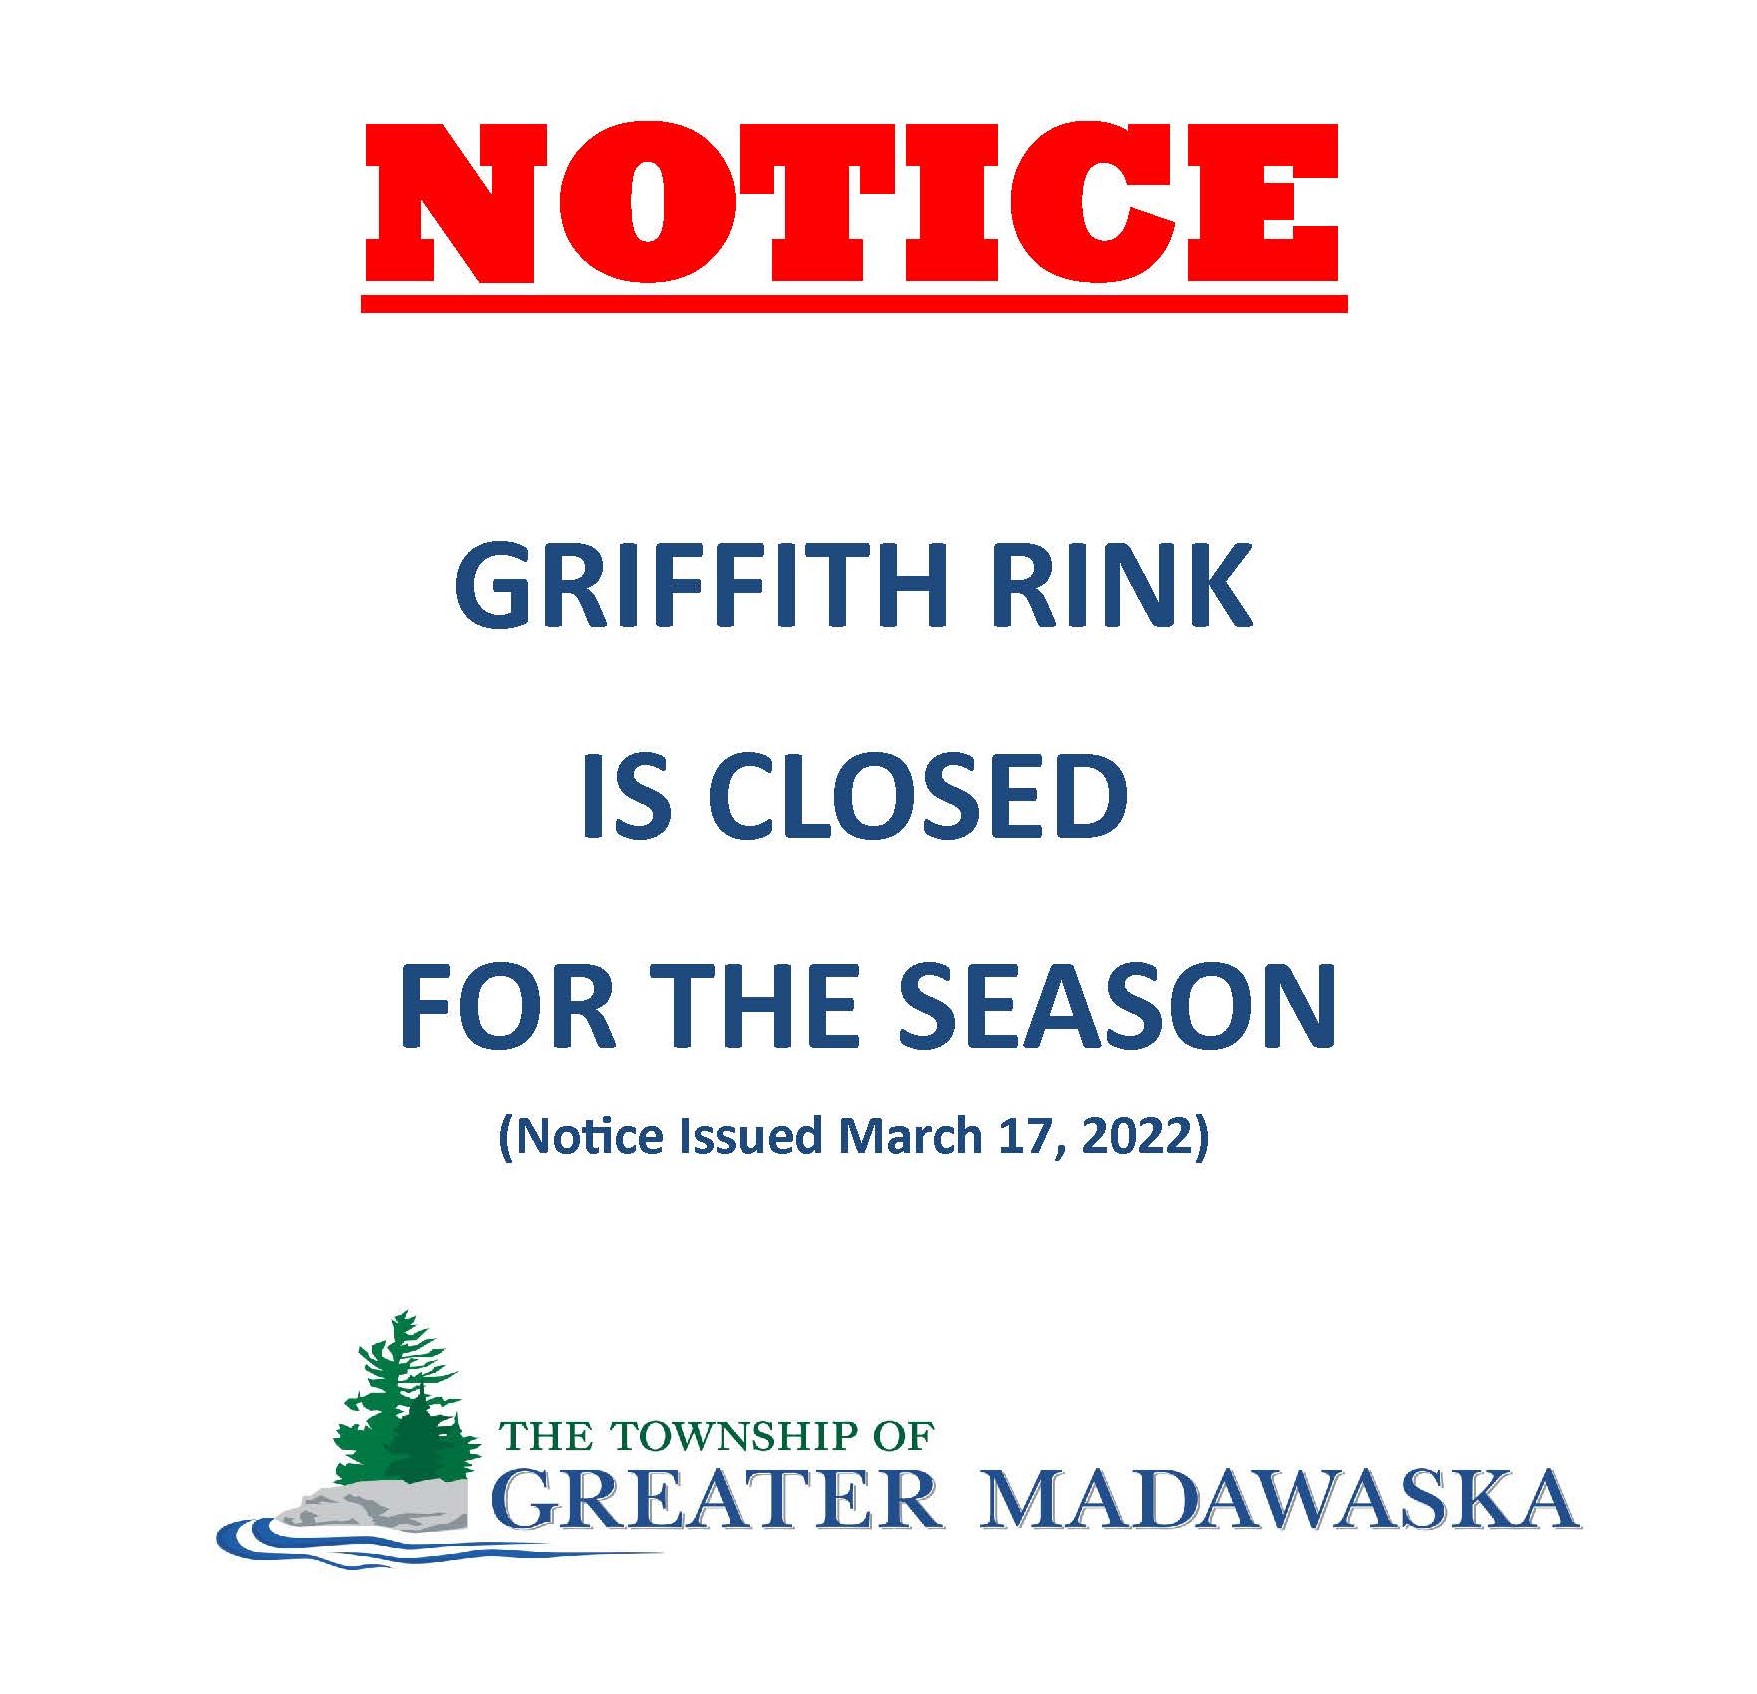 Griffith Rink is closed